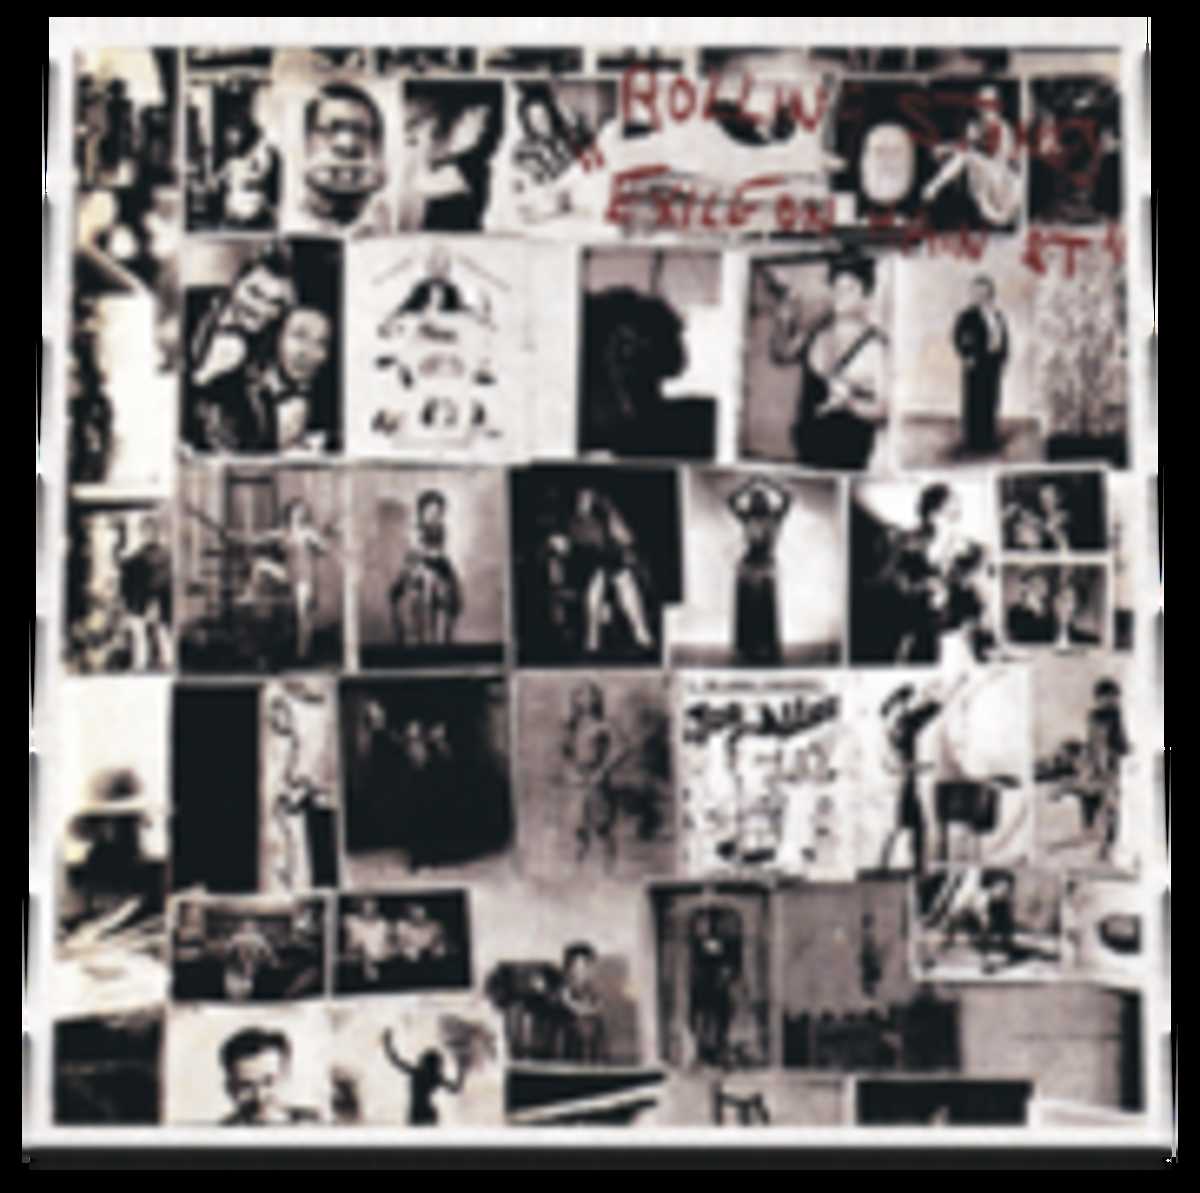 Rolling Stones - Exile on Main street